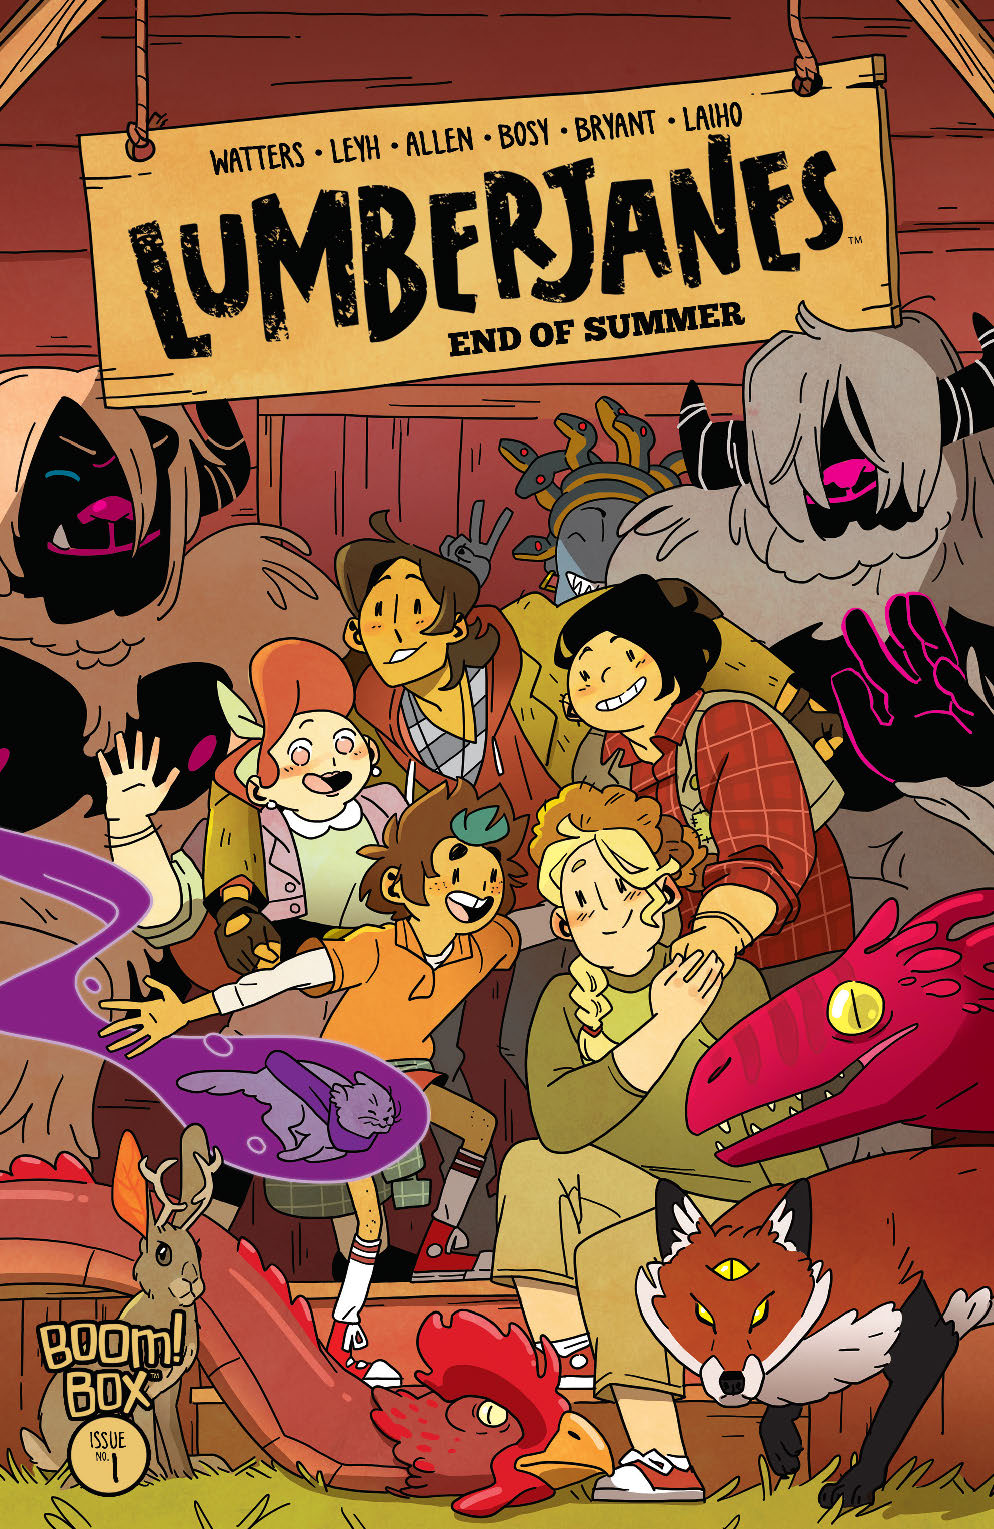 Lumberjanes End of Summer #1 Cover A Leyh